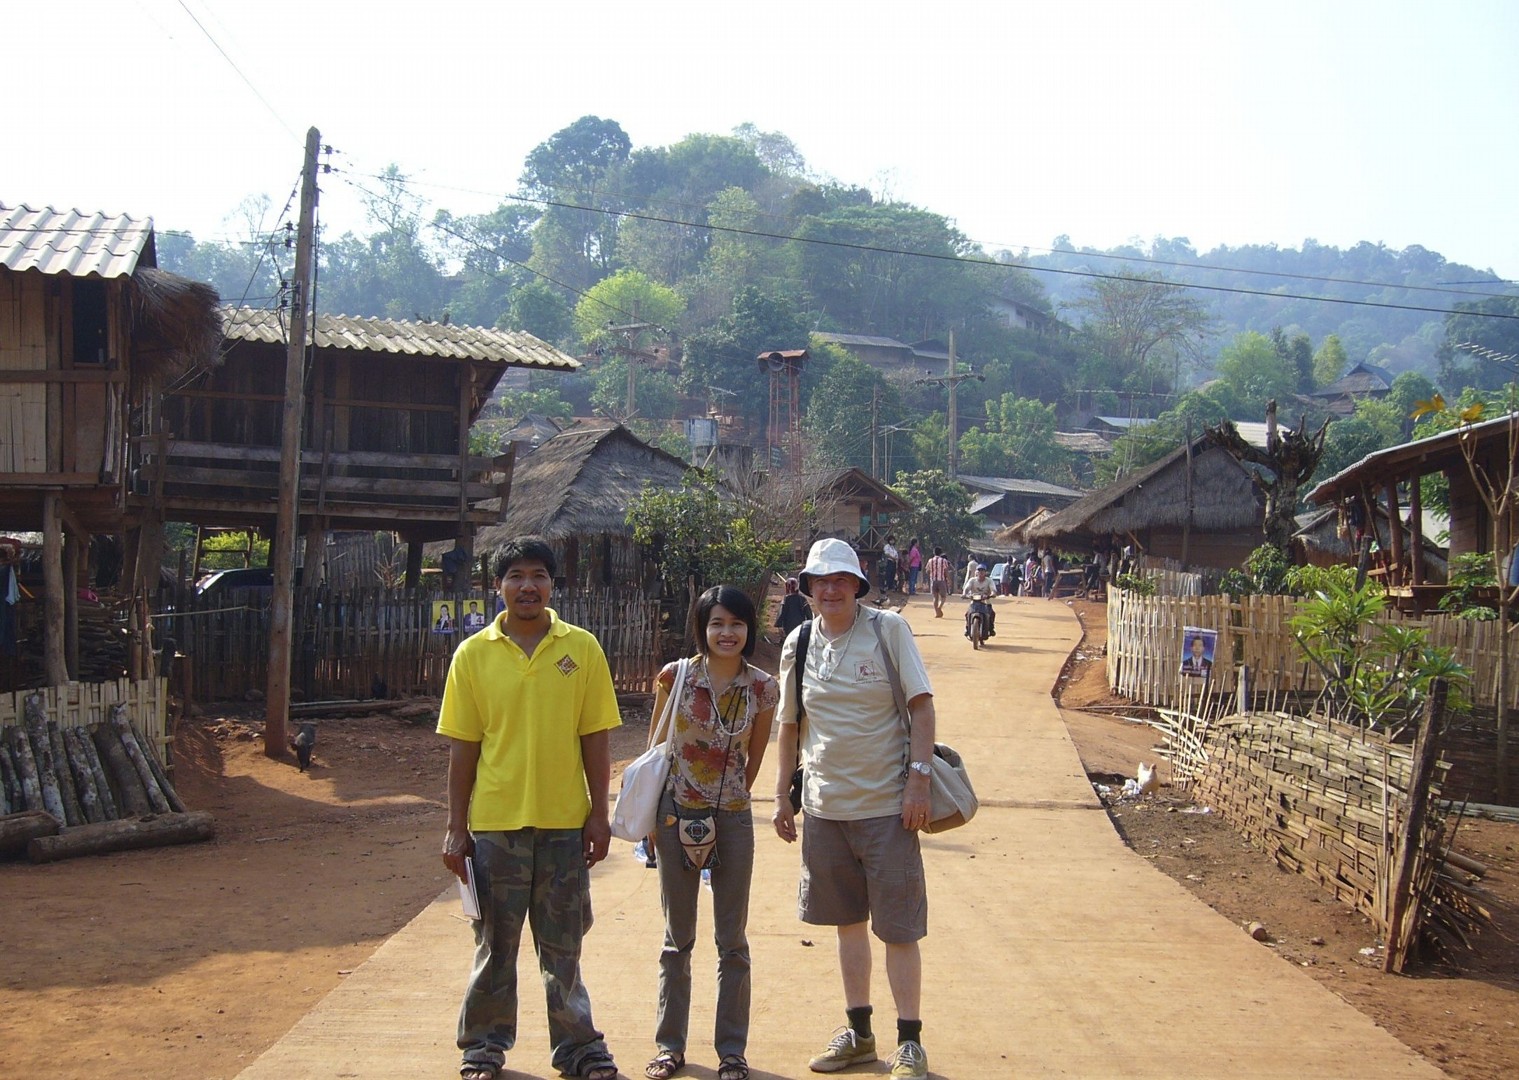 Visiting villages.jpg - Thailand - Meet the People Tours